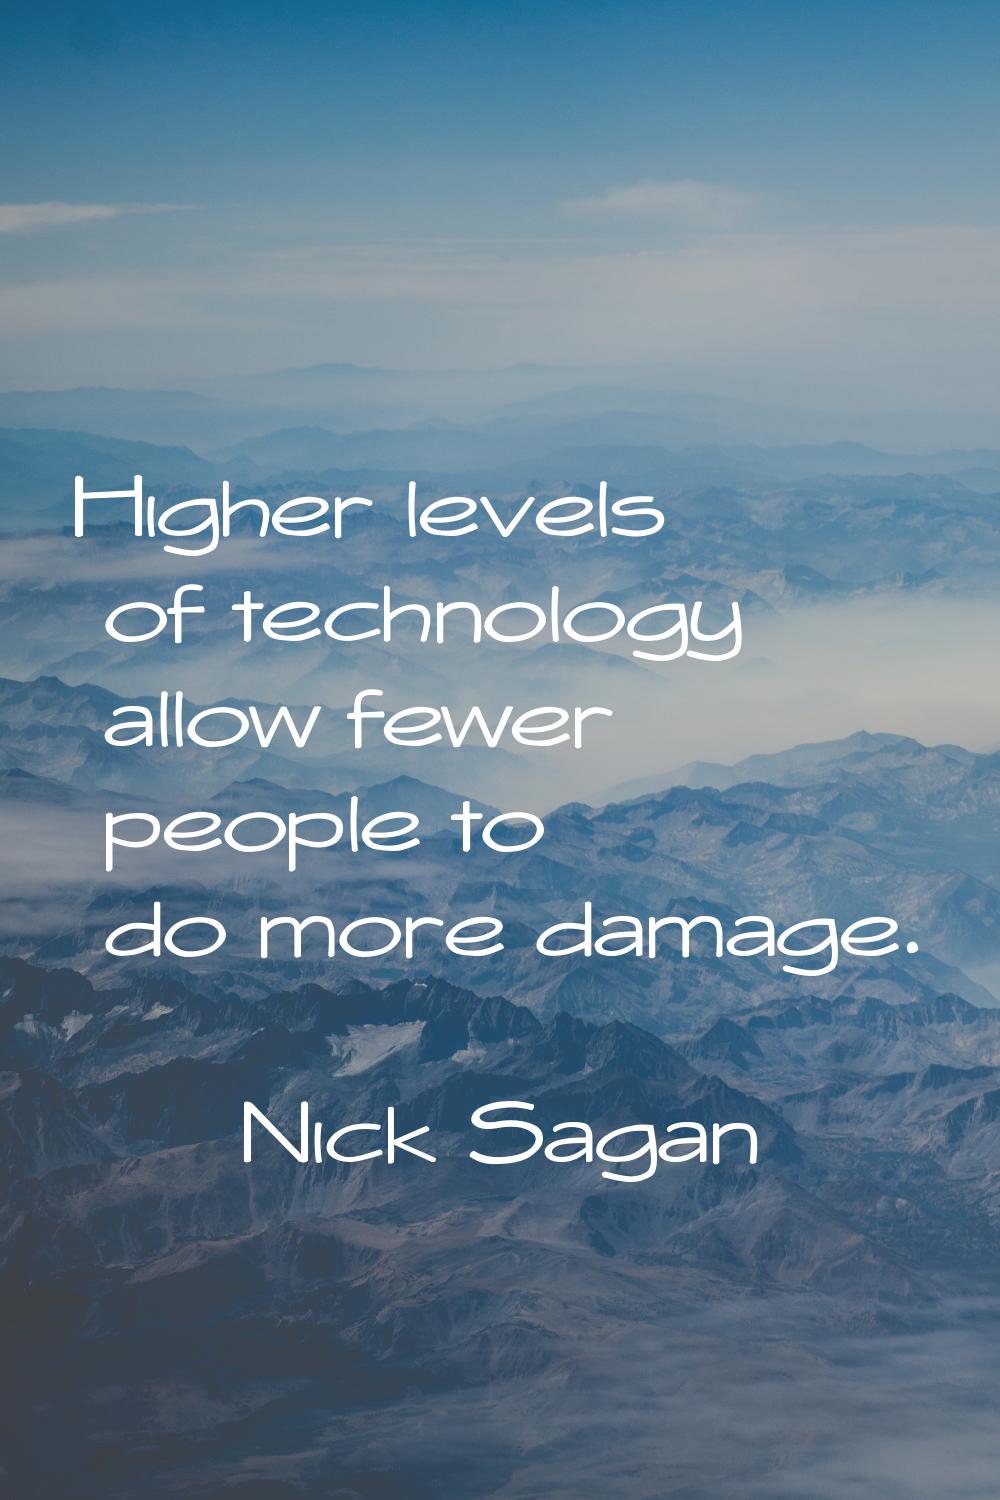 Higher levels of technology allow fewer people to do more damage.